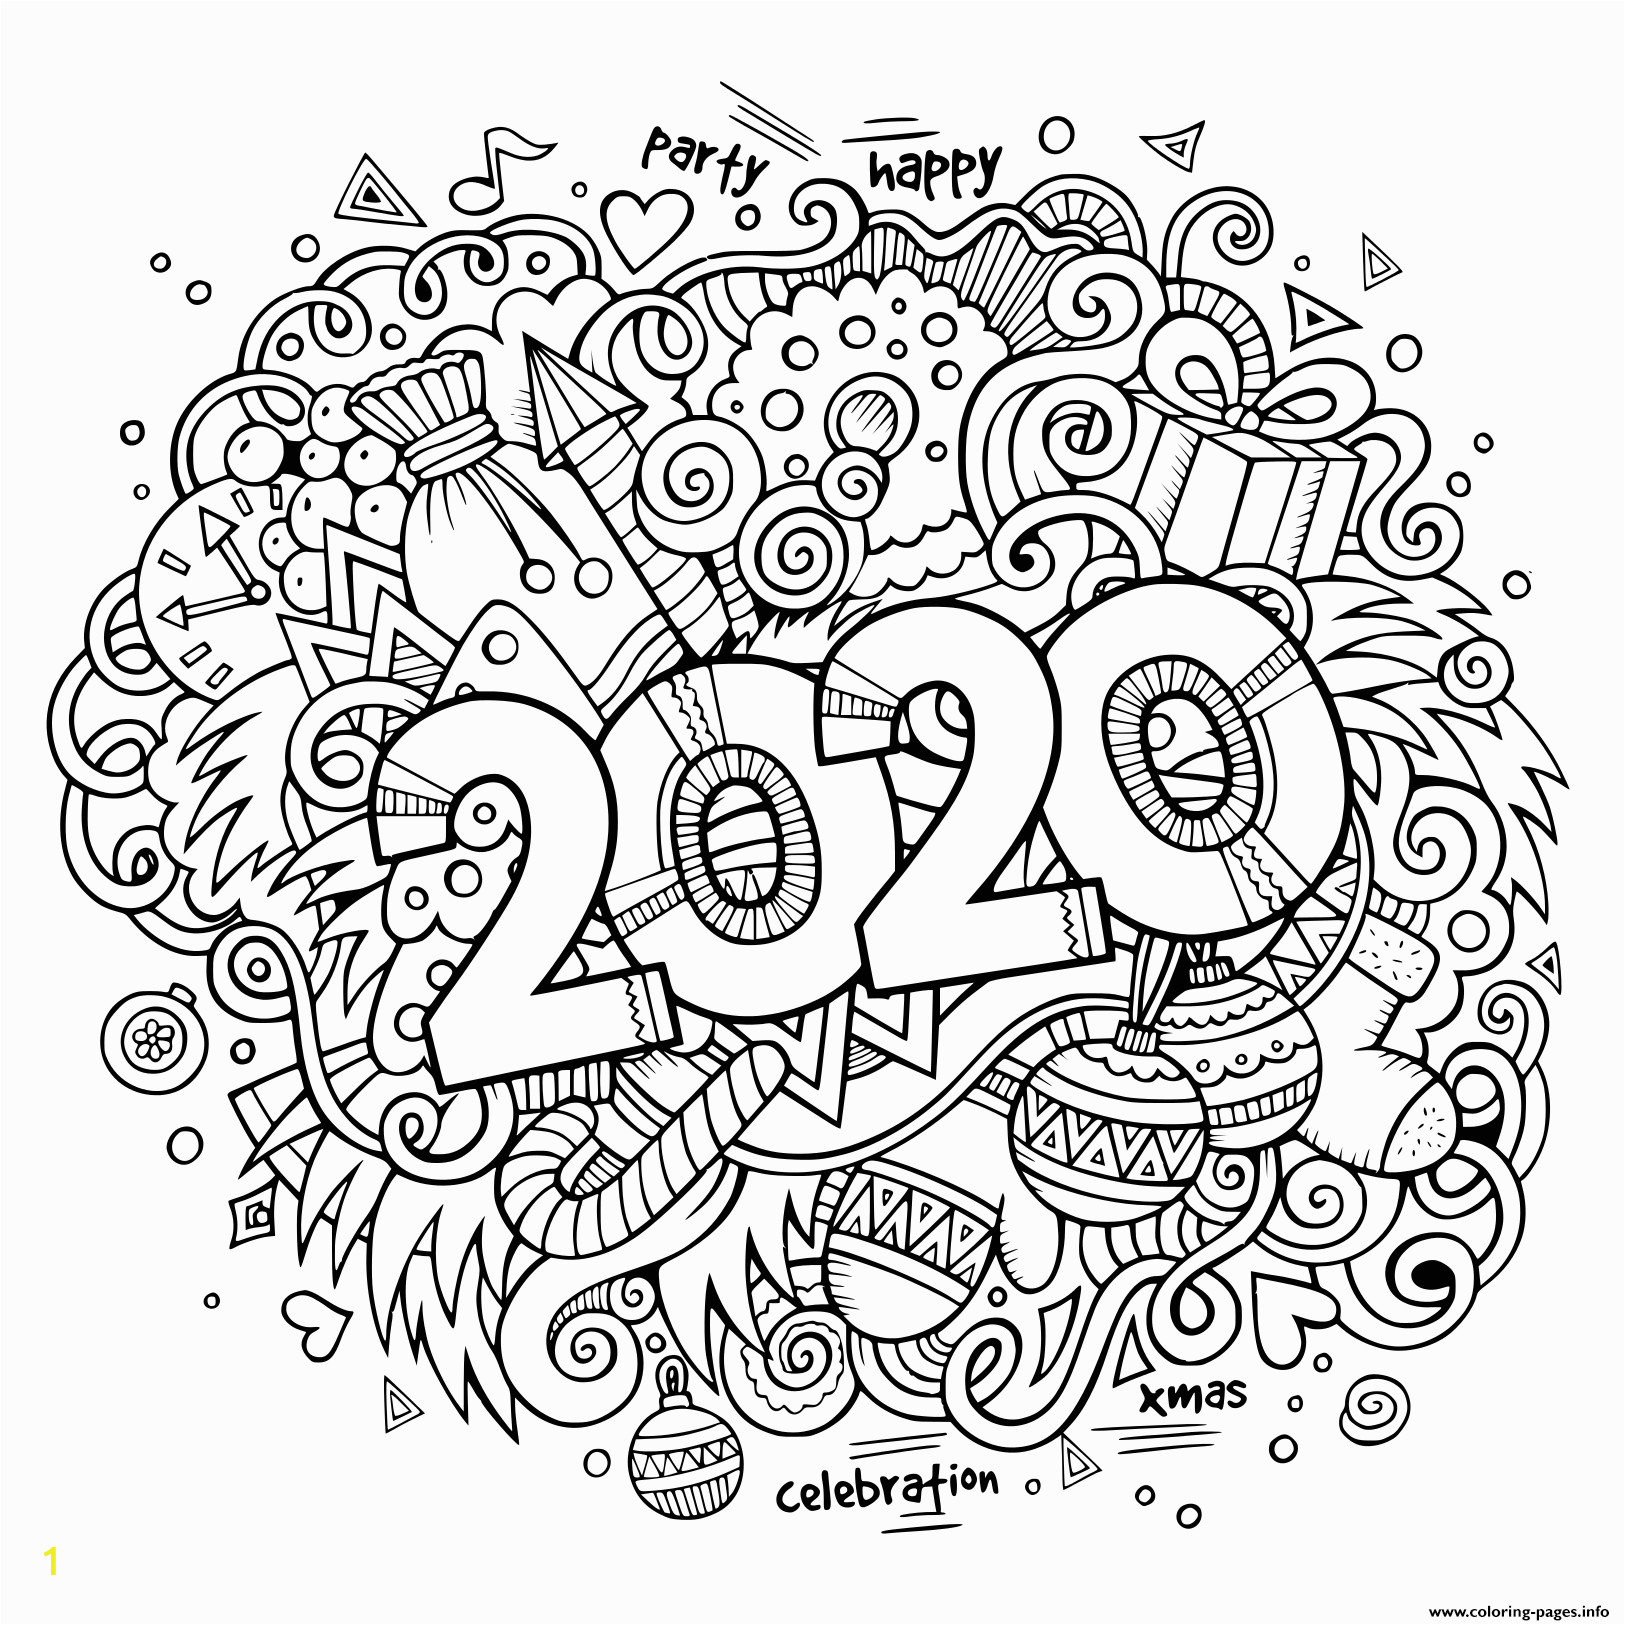 2020 Chinese New Year Coloring Pages New Year 2020 Doodles Objects and Elements Poster Design